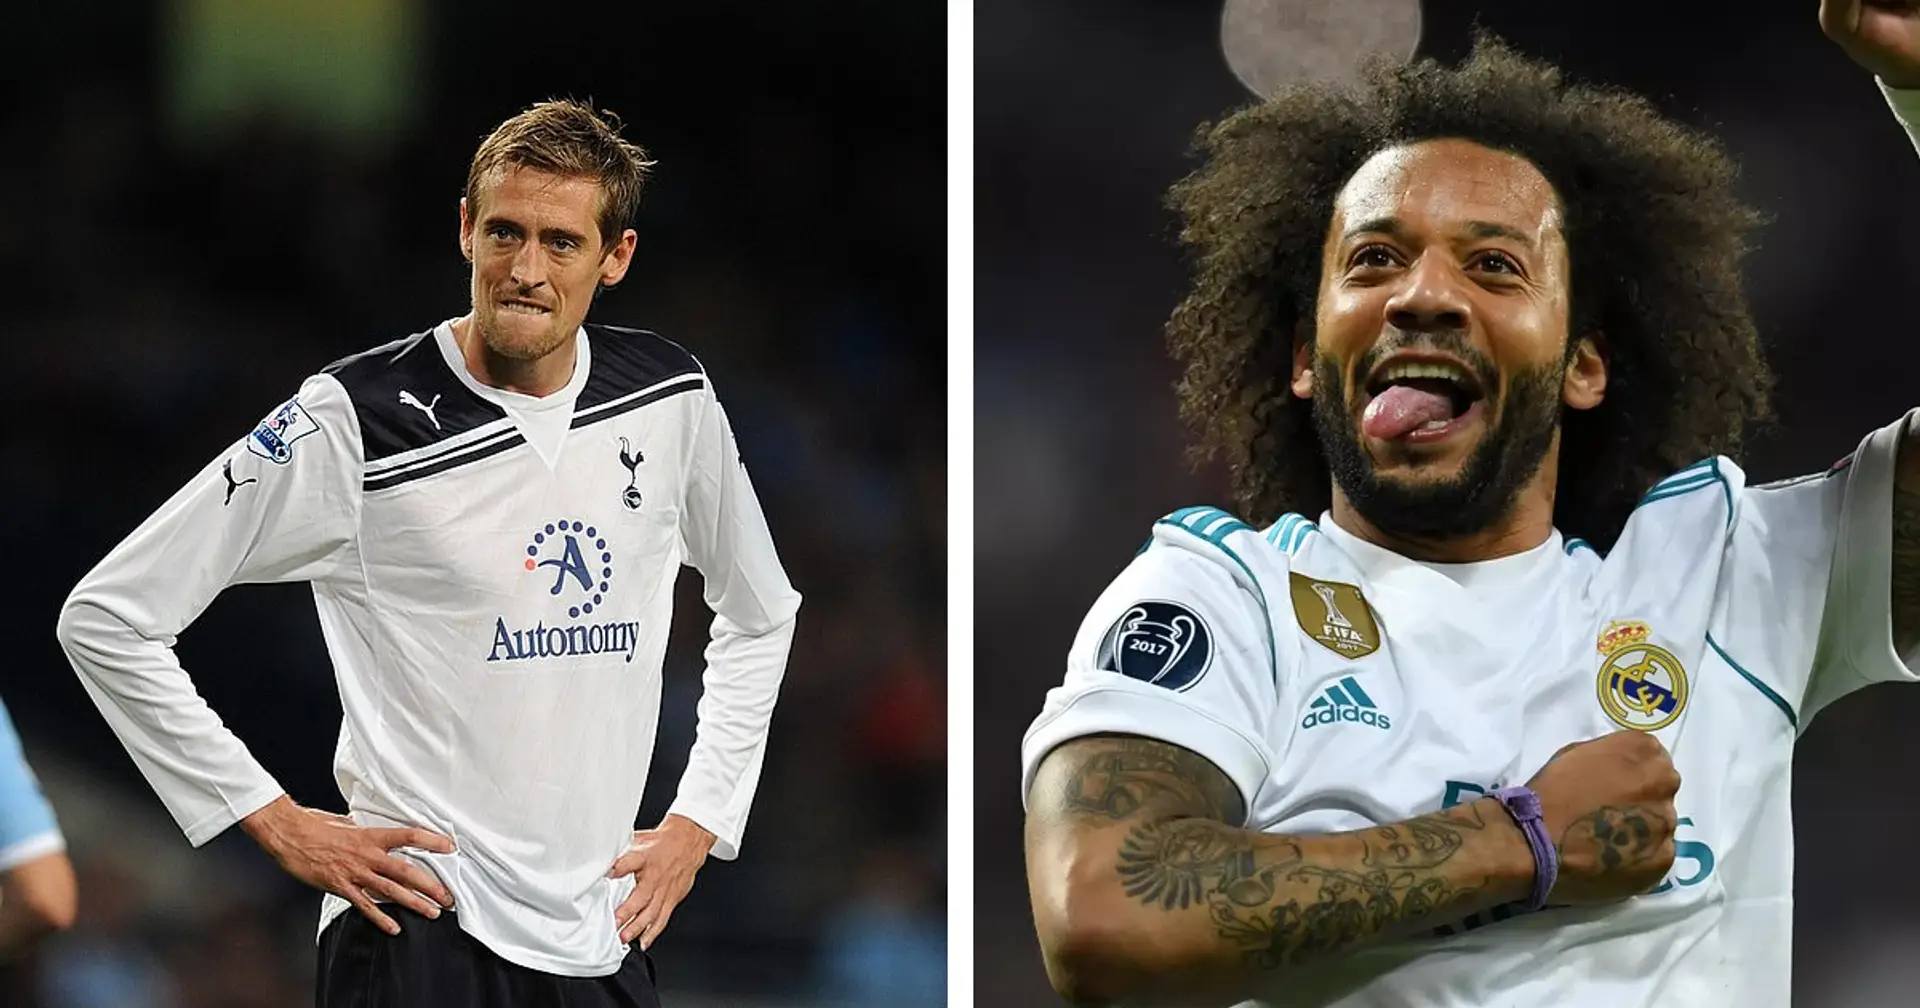 'I’ve never wanted to punch anyone more in my life': Peter Crouch on being sent off by Marcelo in 2011